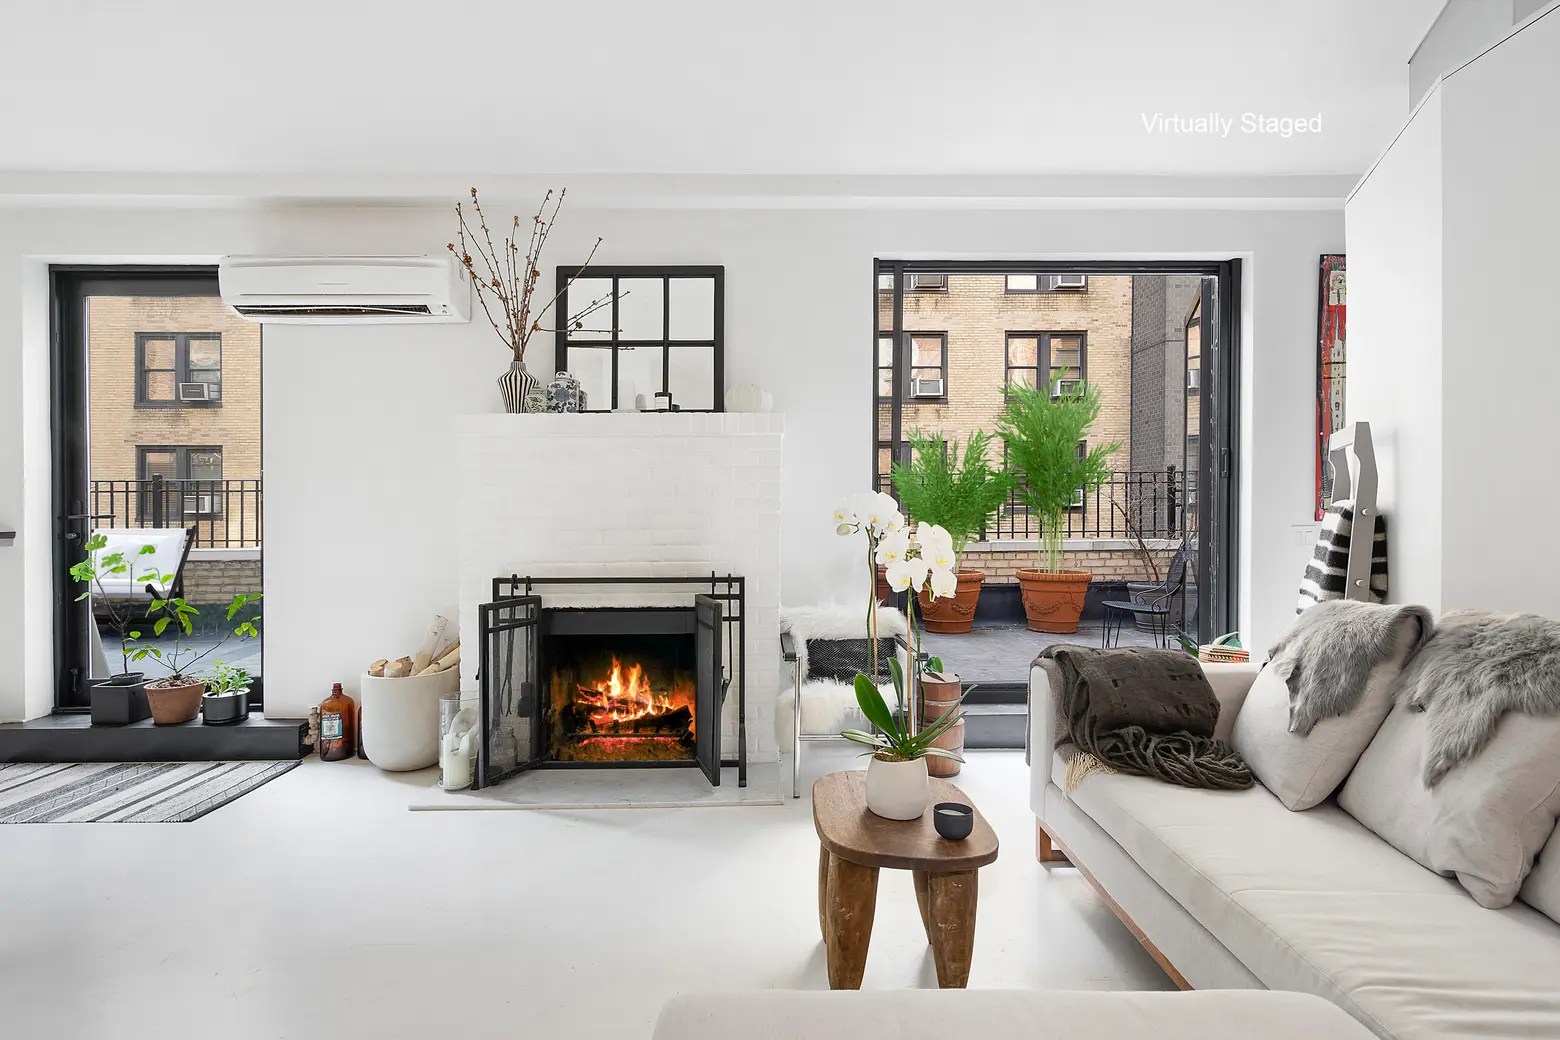 Mod Midtown West penthouse with an enormous wraparound terrace seeks just under $1M